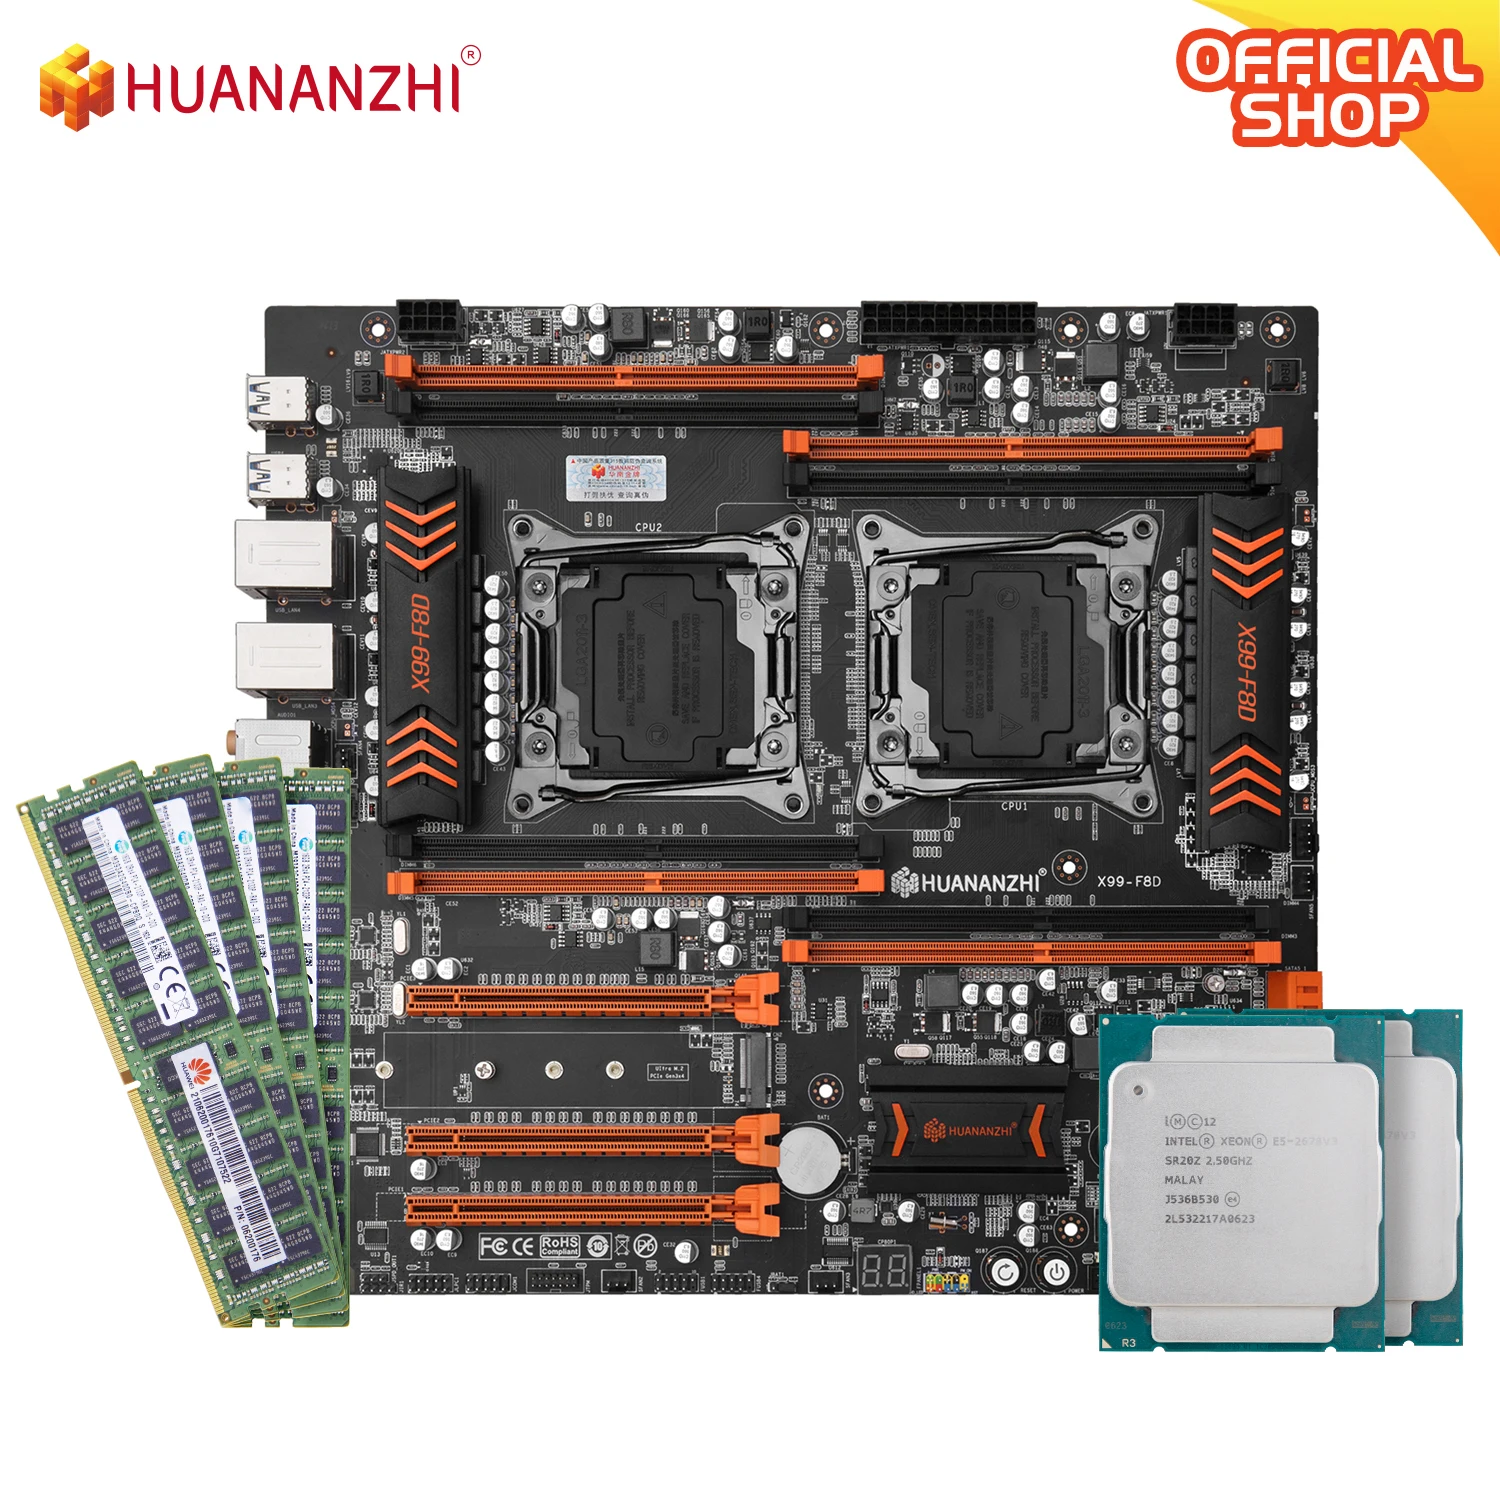 huananzhi x99 f8d x99 motherboard intel dual with intel xeon e5 2678 v32 with 416gb ddr4 recc memory combo kit nvme usb 3 0 free global shipping